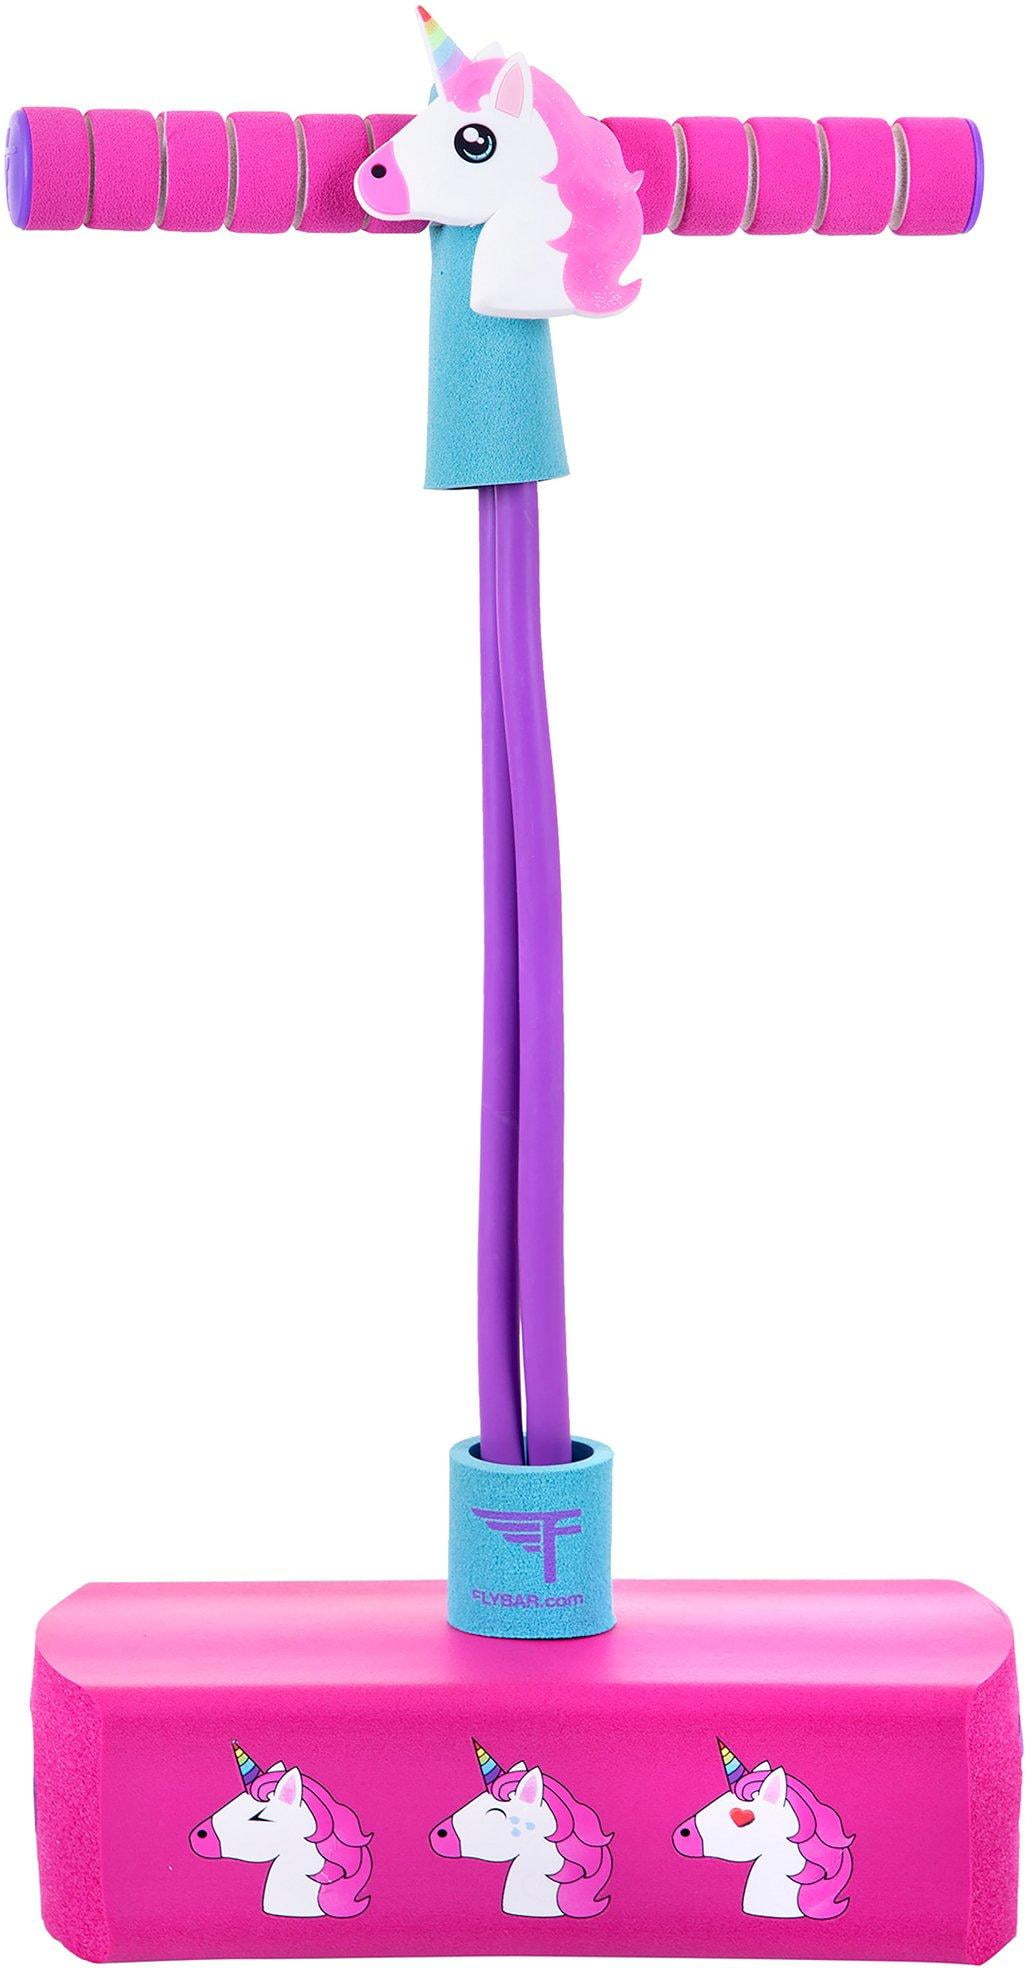 Flybar My First Foam Pogo Jumper for Kids Fun and Safe Pogo Stick for Toddlers Pink Princess Durable Foam and Bungee Jumper for Ages 3 and up Supports up to 250lbs